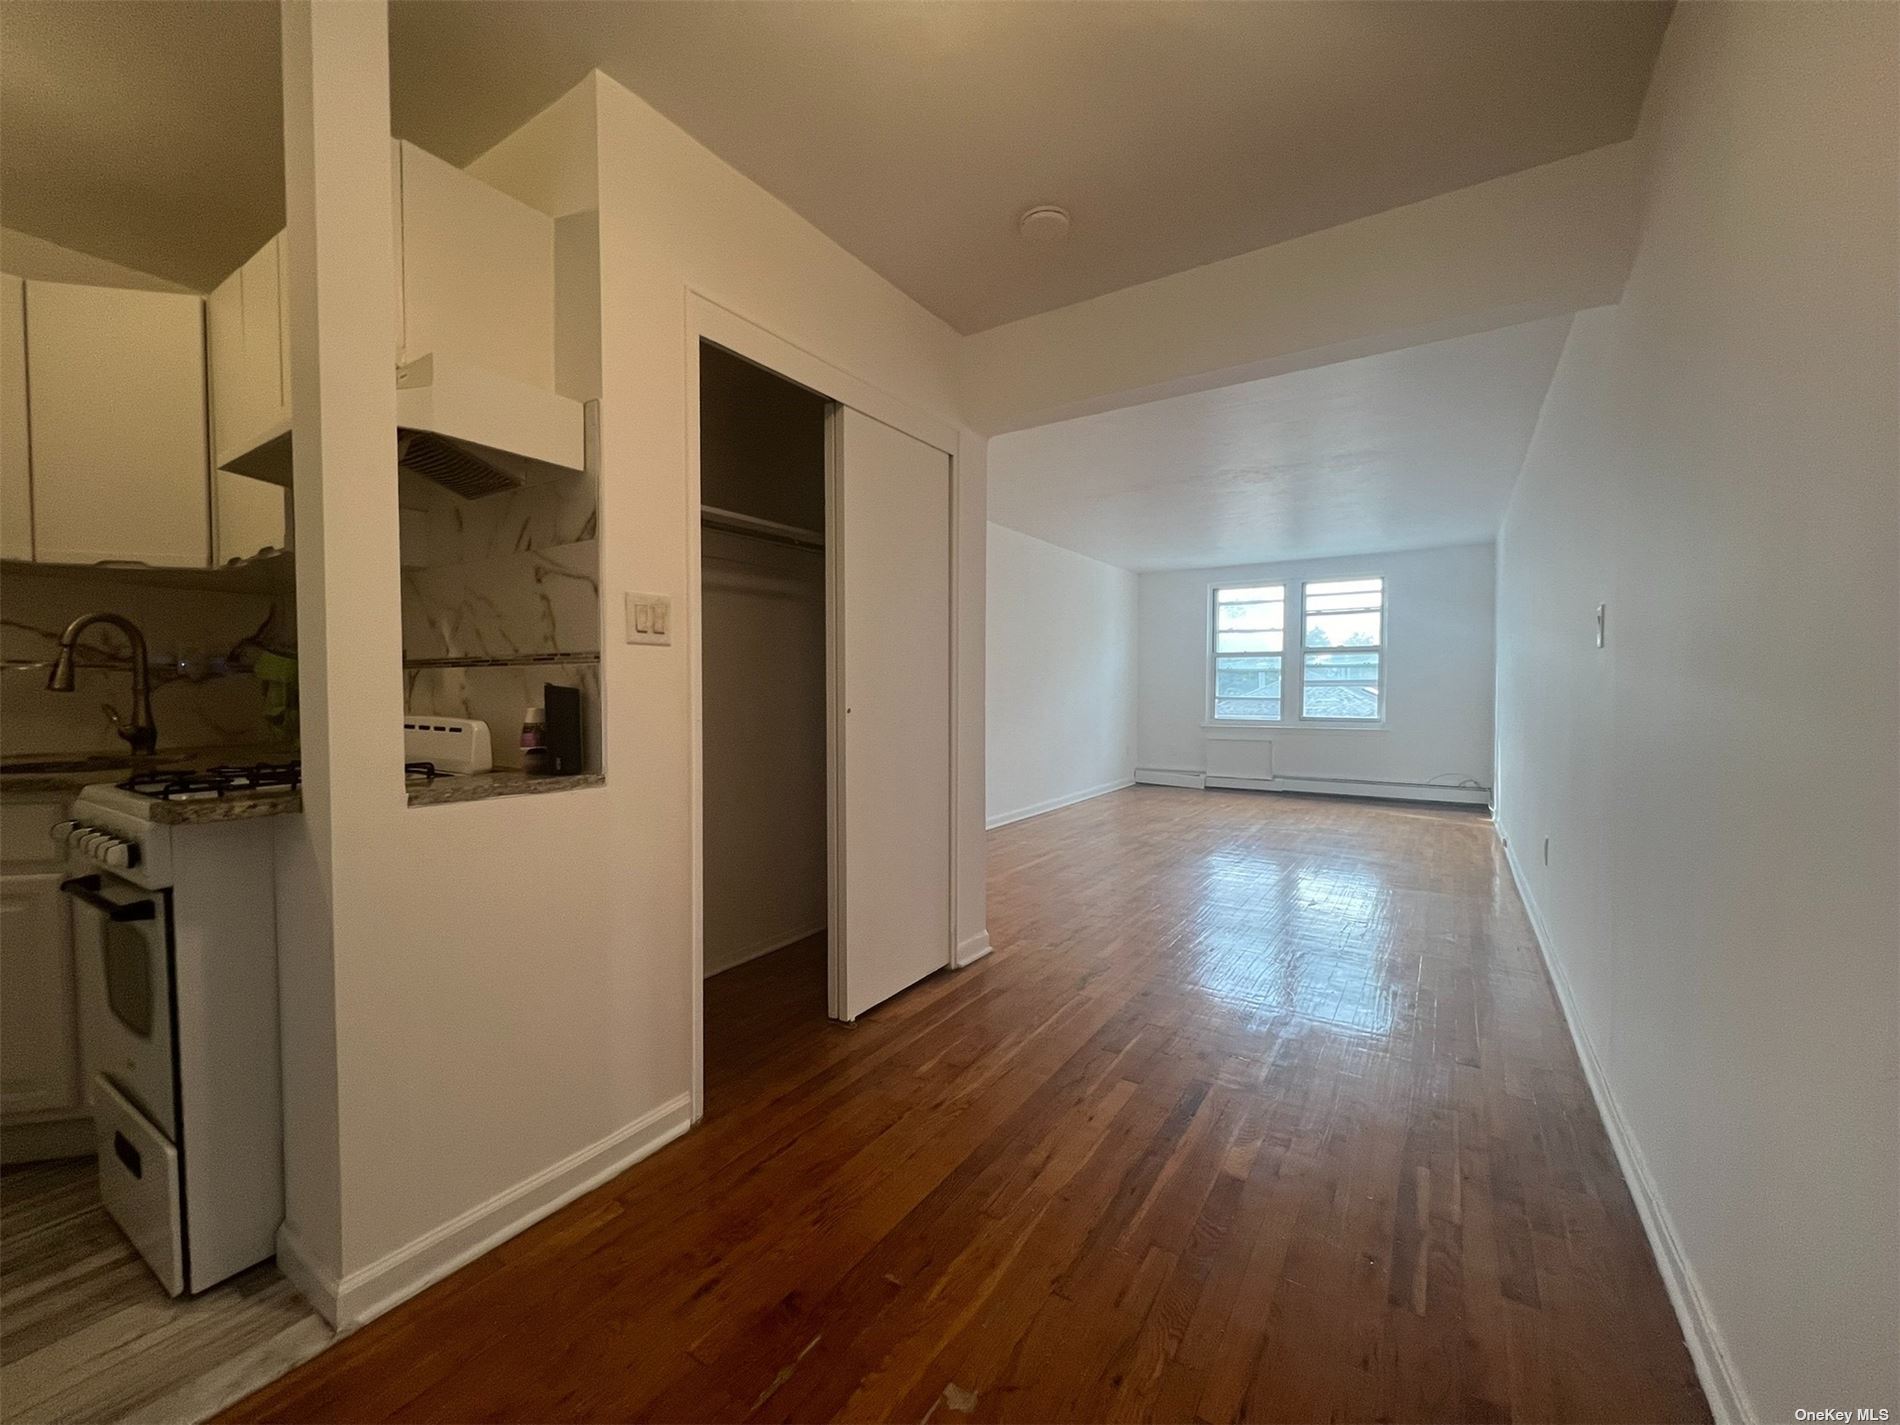 Apartment in Kew Gardens - 129th  Queens, NY 11415